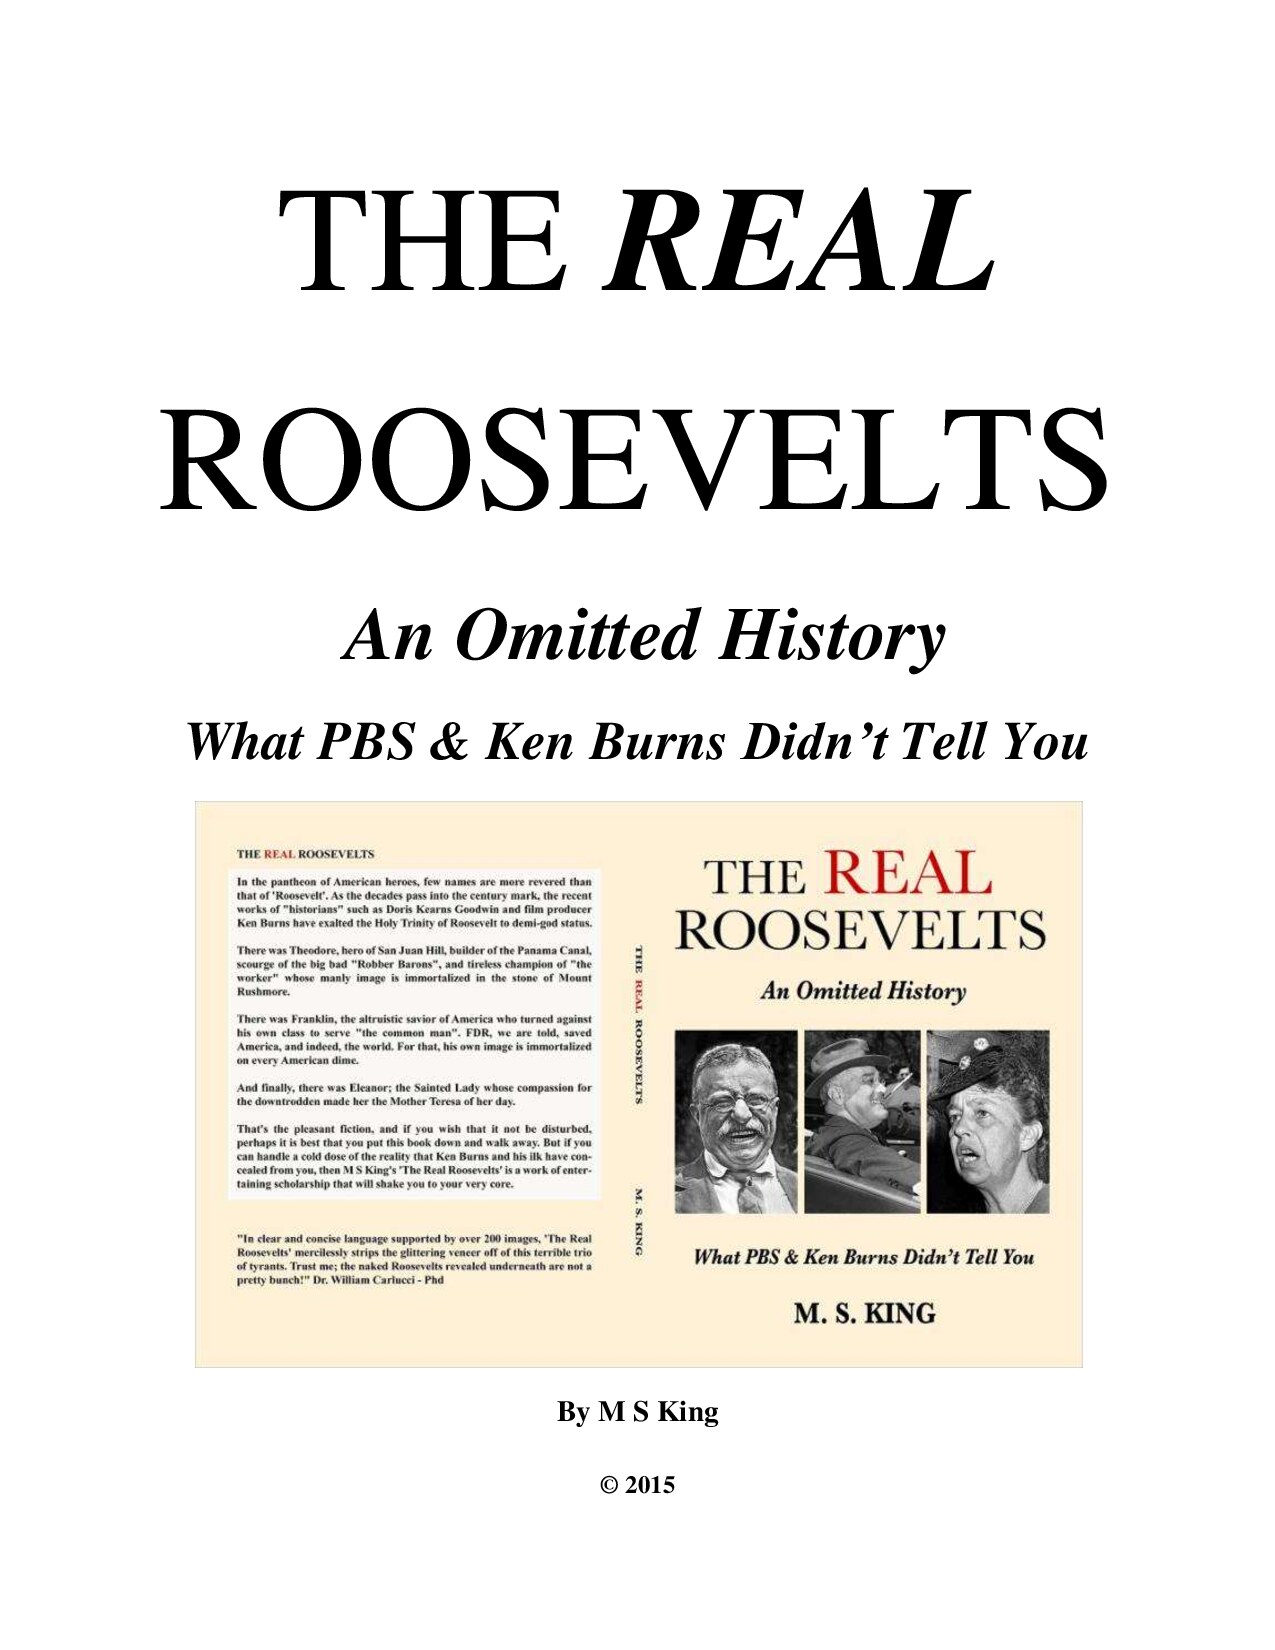 King, Mike S.; The Real Roosevelts - An Omitted History, What PBS & Ken Burns Didn't Tell You